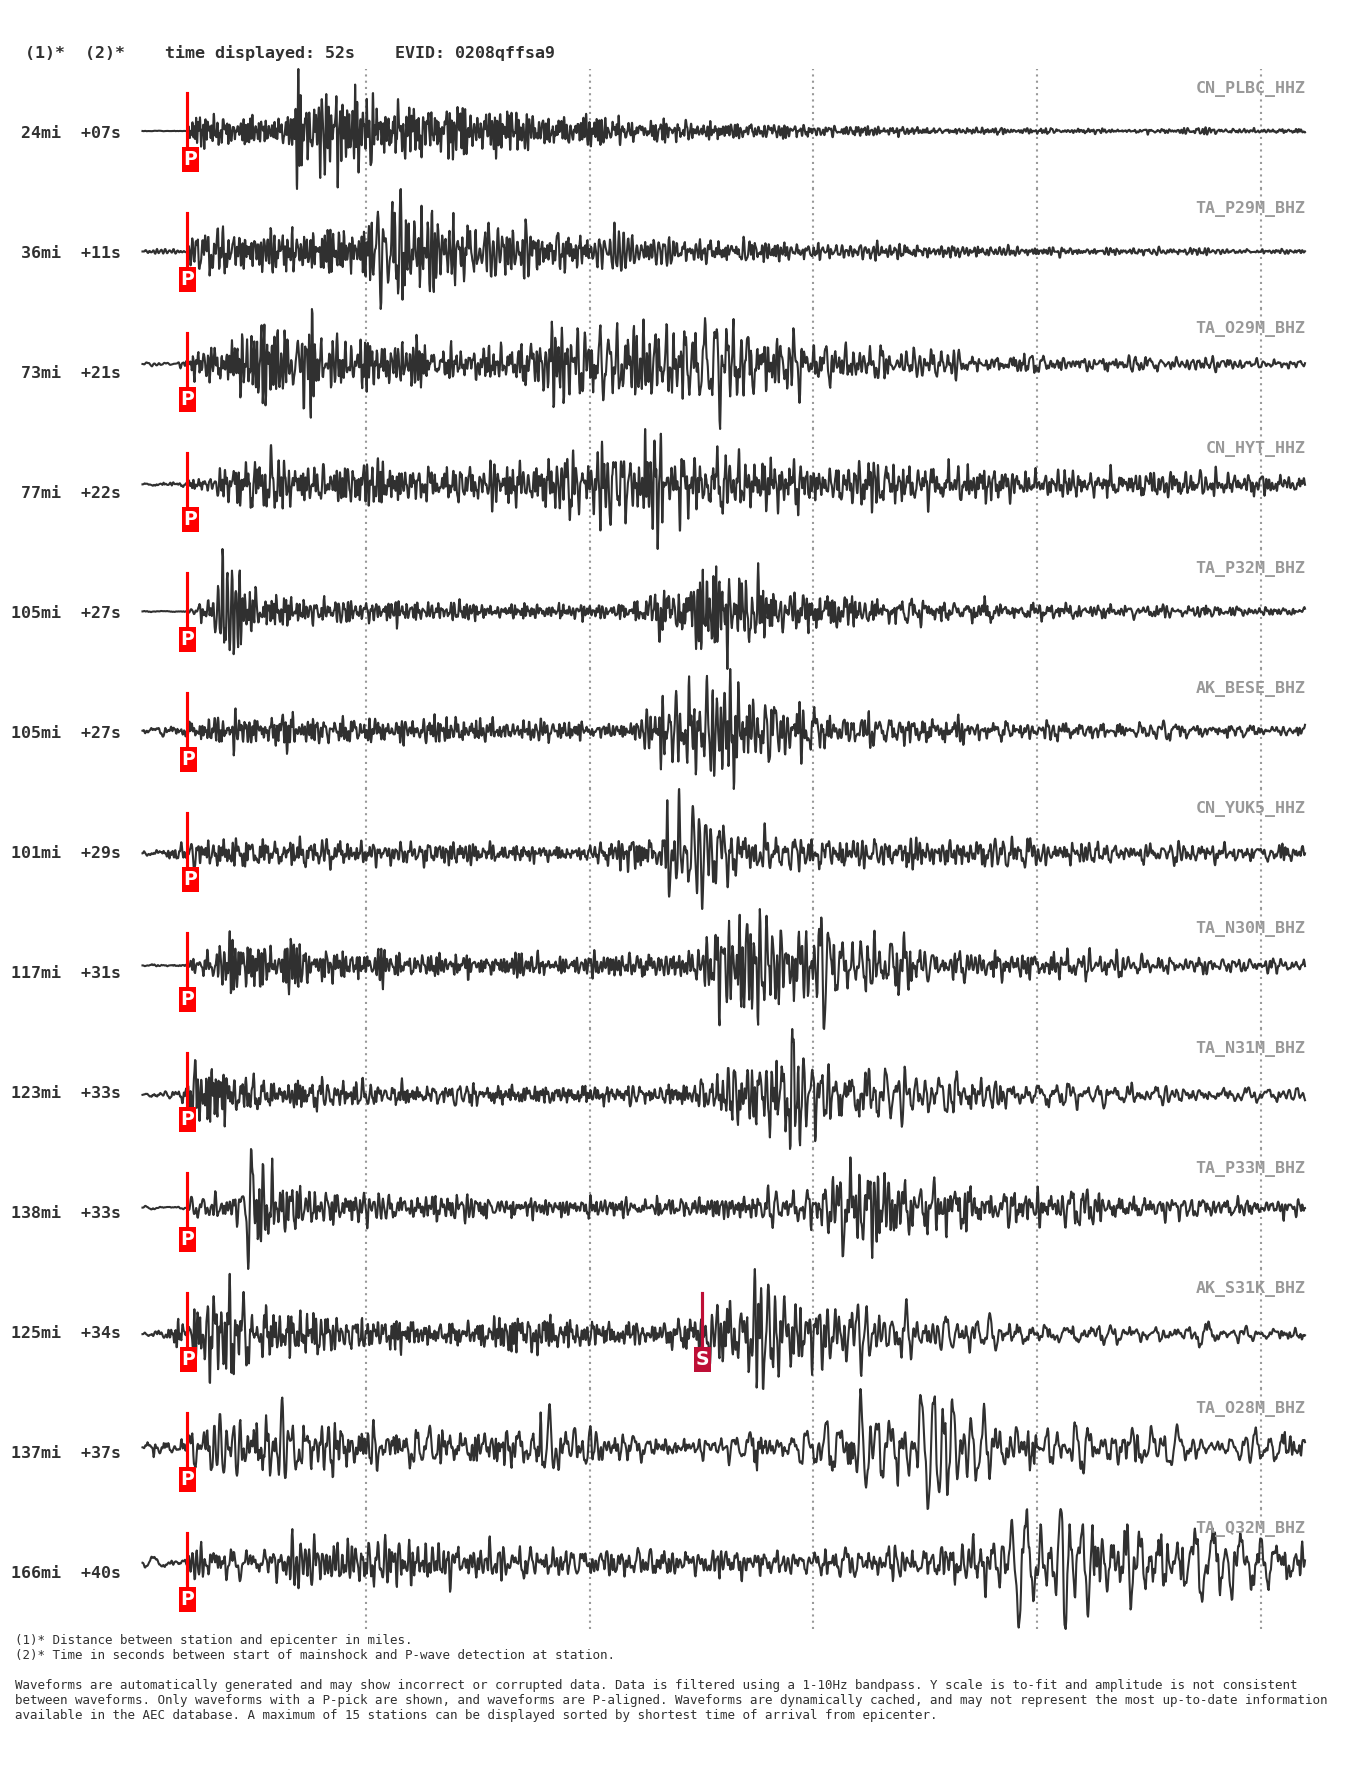 Waveforms of a M2 tectonic earthquake that occurred on July 8, 2020 in Southeast Alaska.